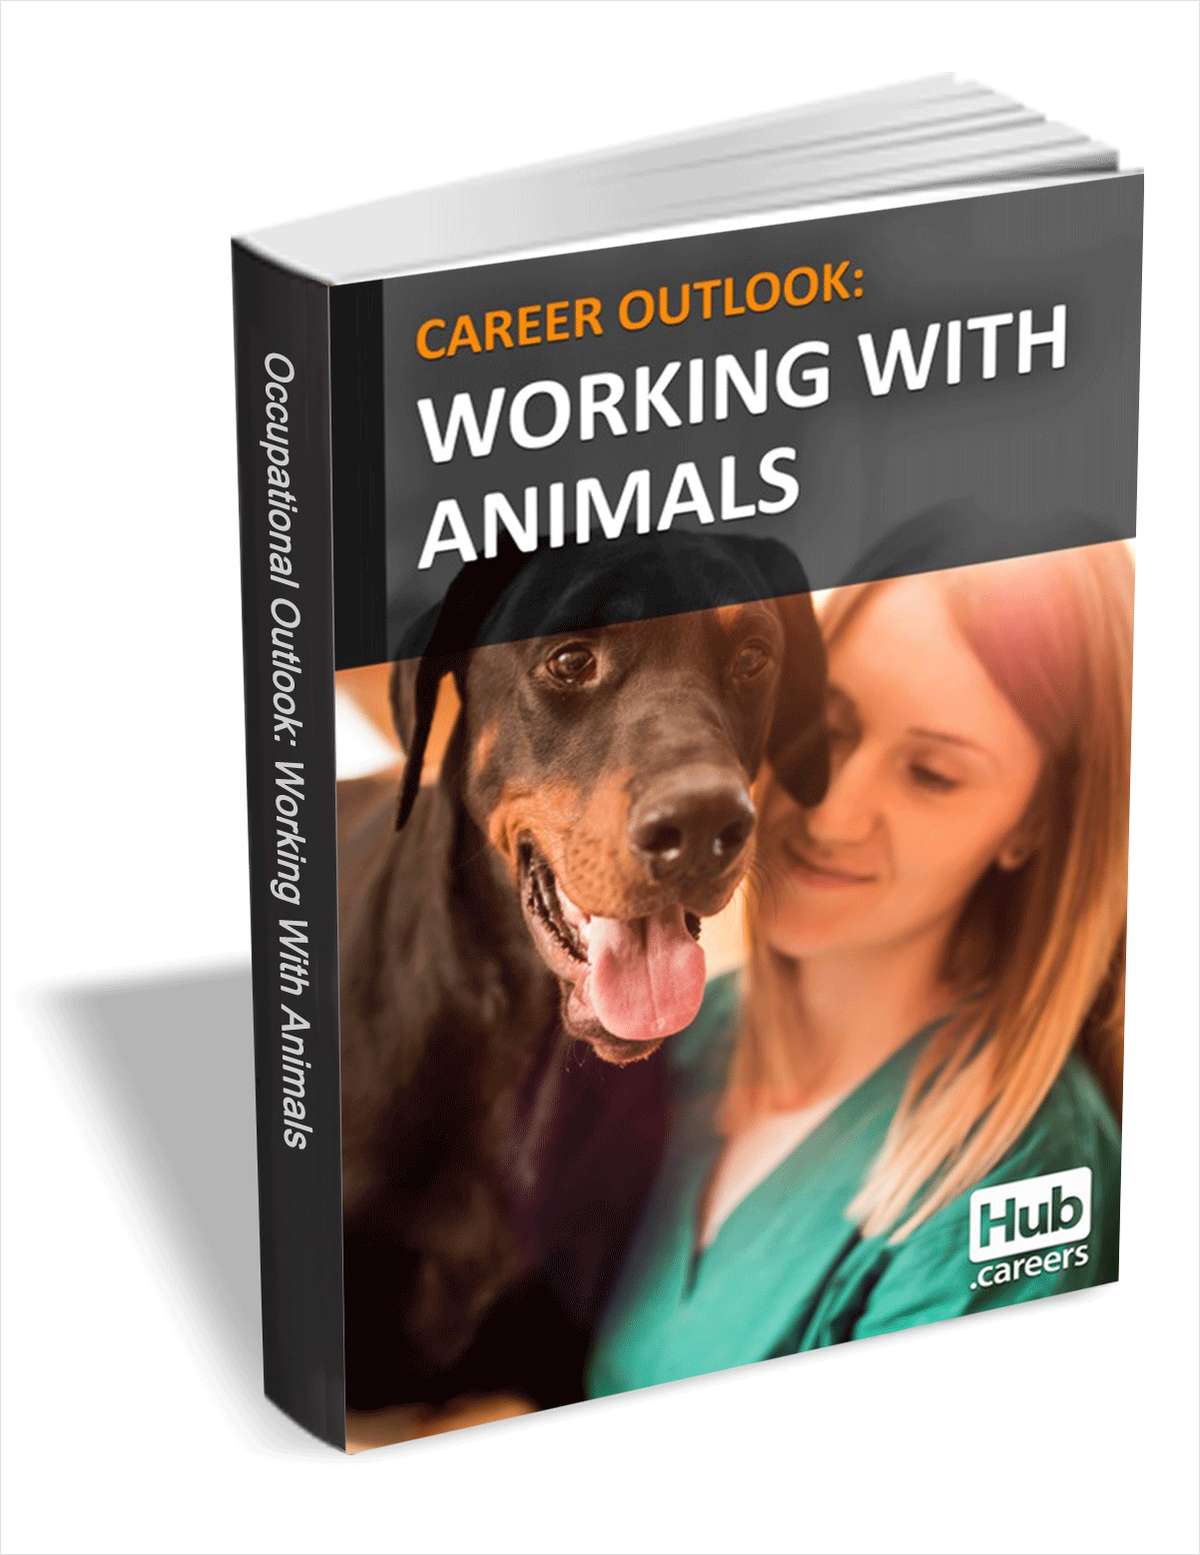 Working with Animals - Career Outlook